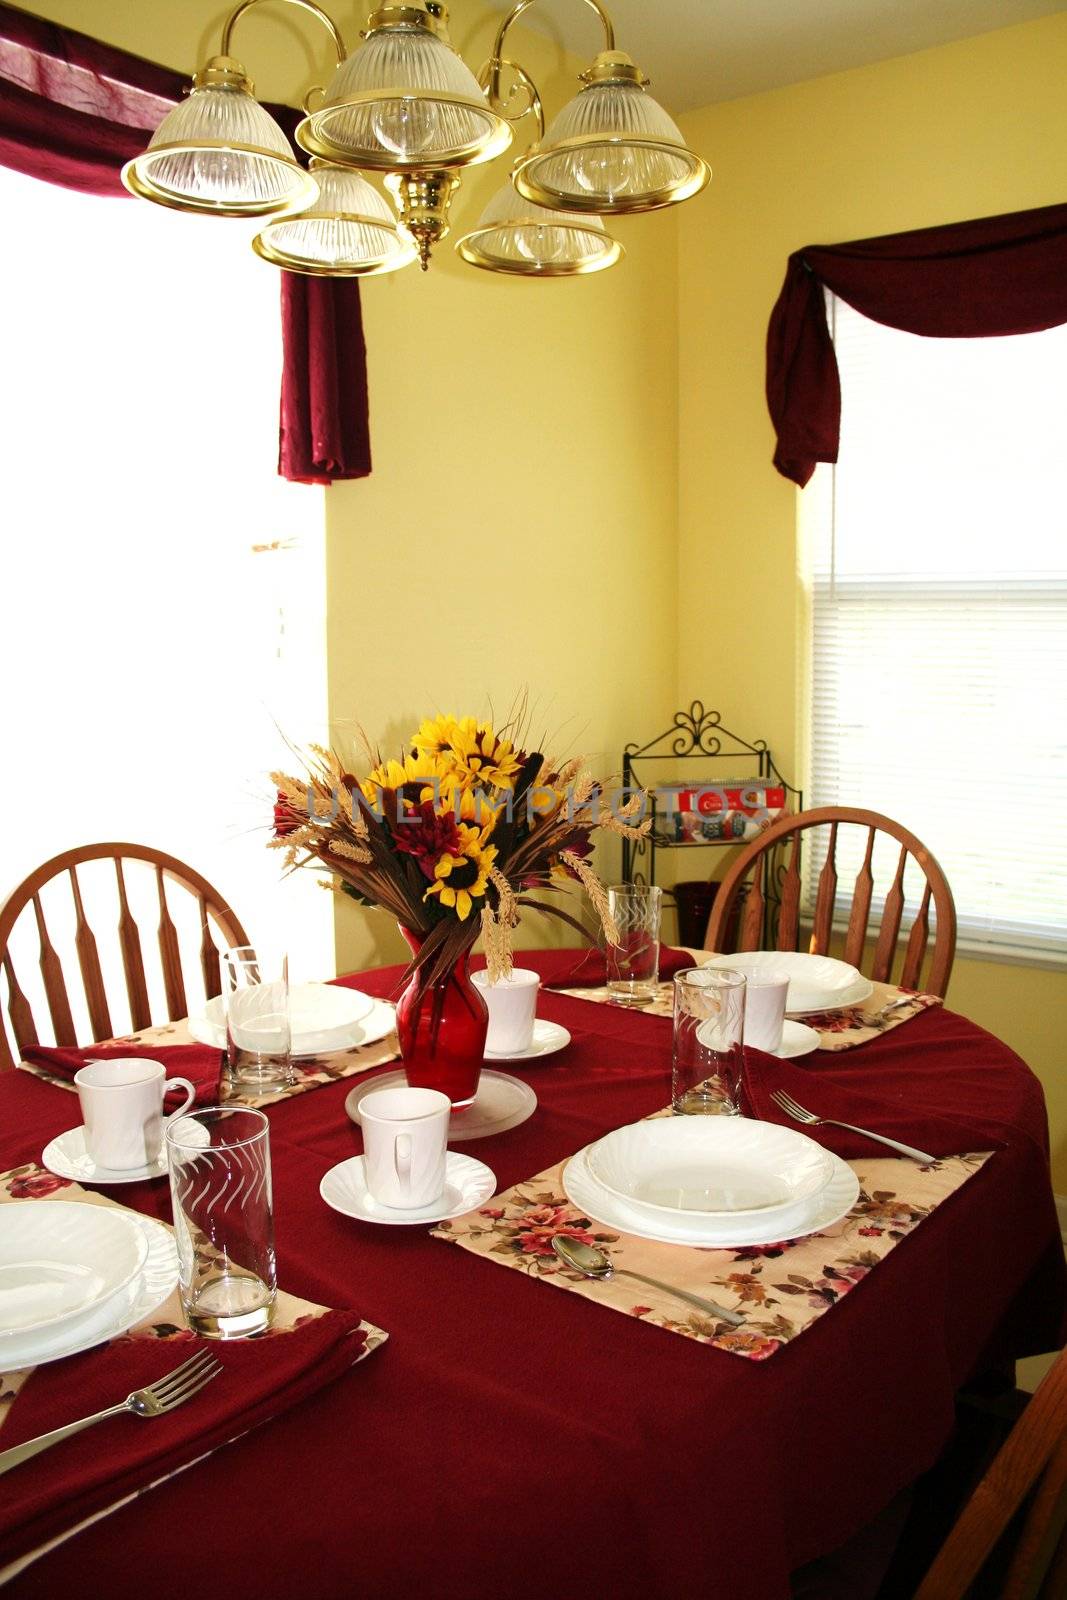 A small kitchen table set for a meal